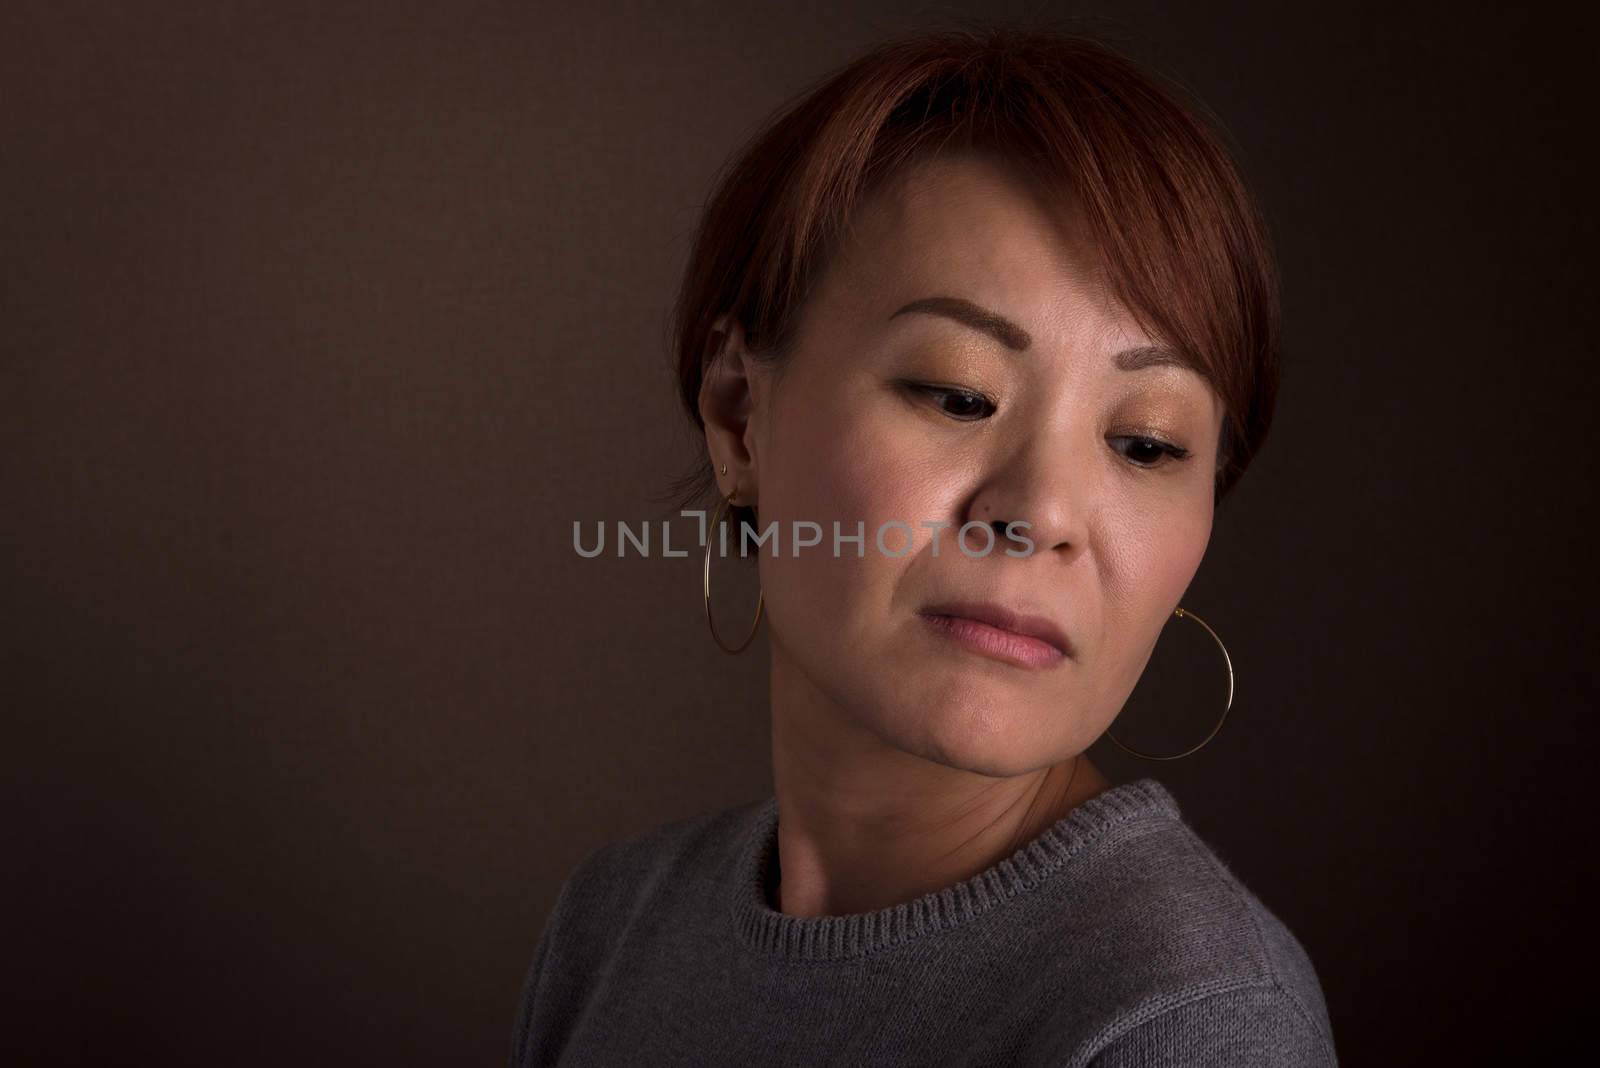 A headshot of a sad looking middle aged Japanese woman.